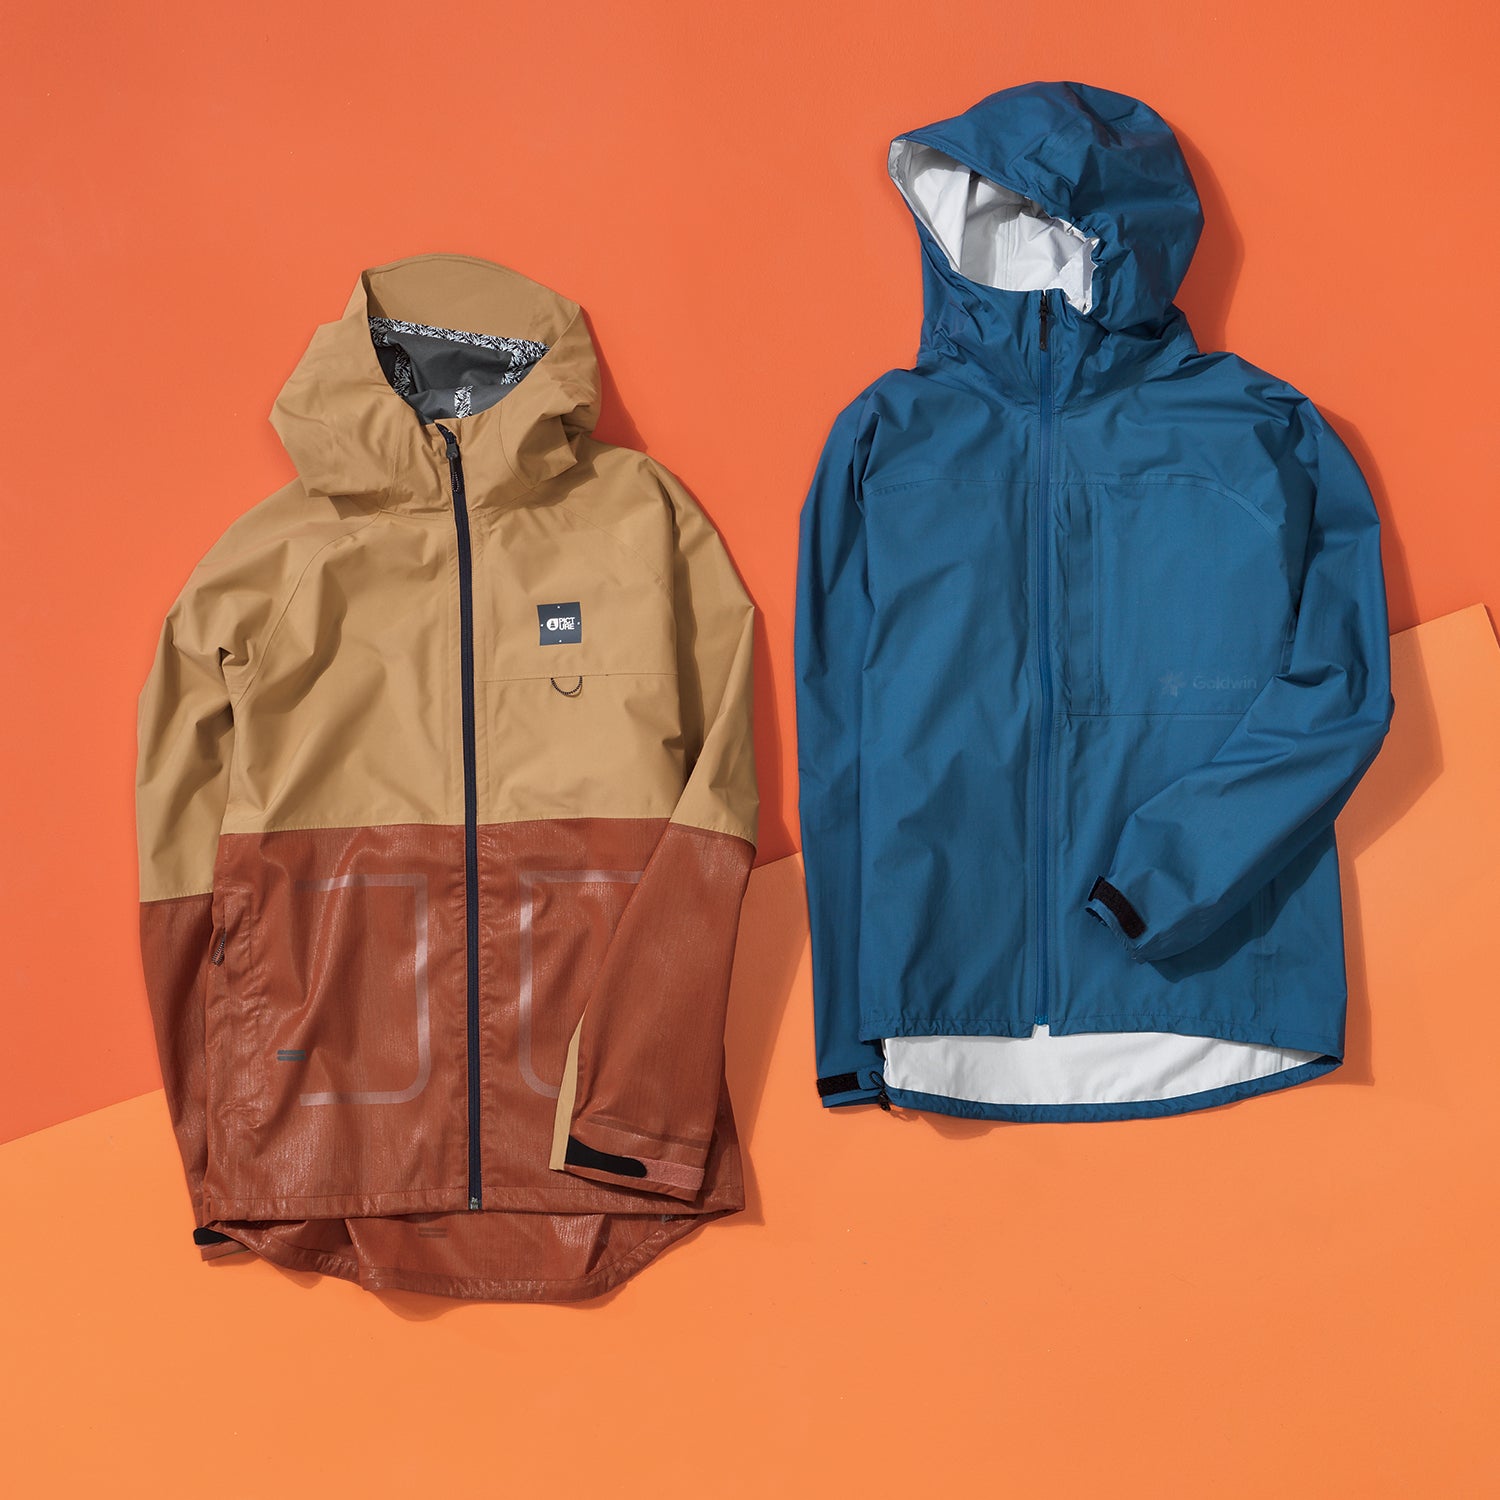 The Best Hard and Soft Shell Jackets of 2022 - Outside Online